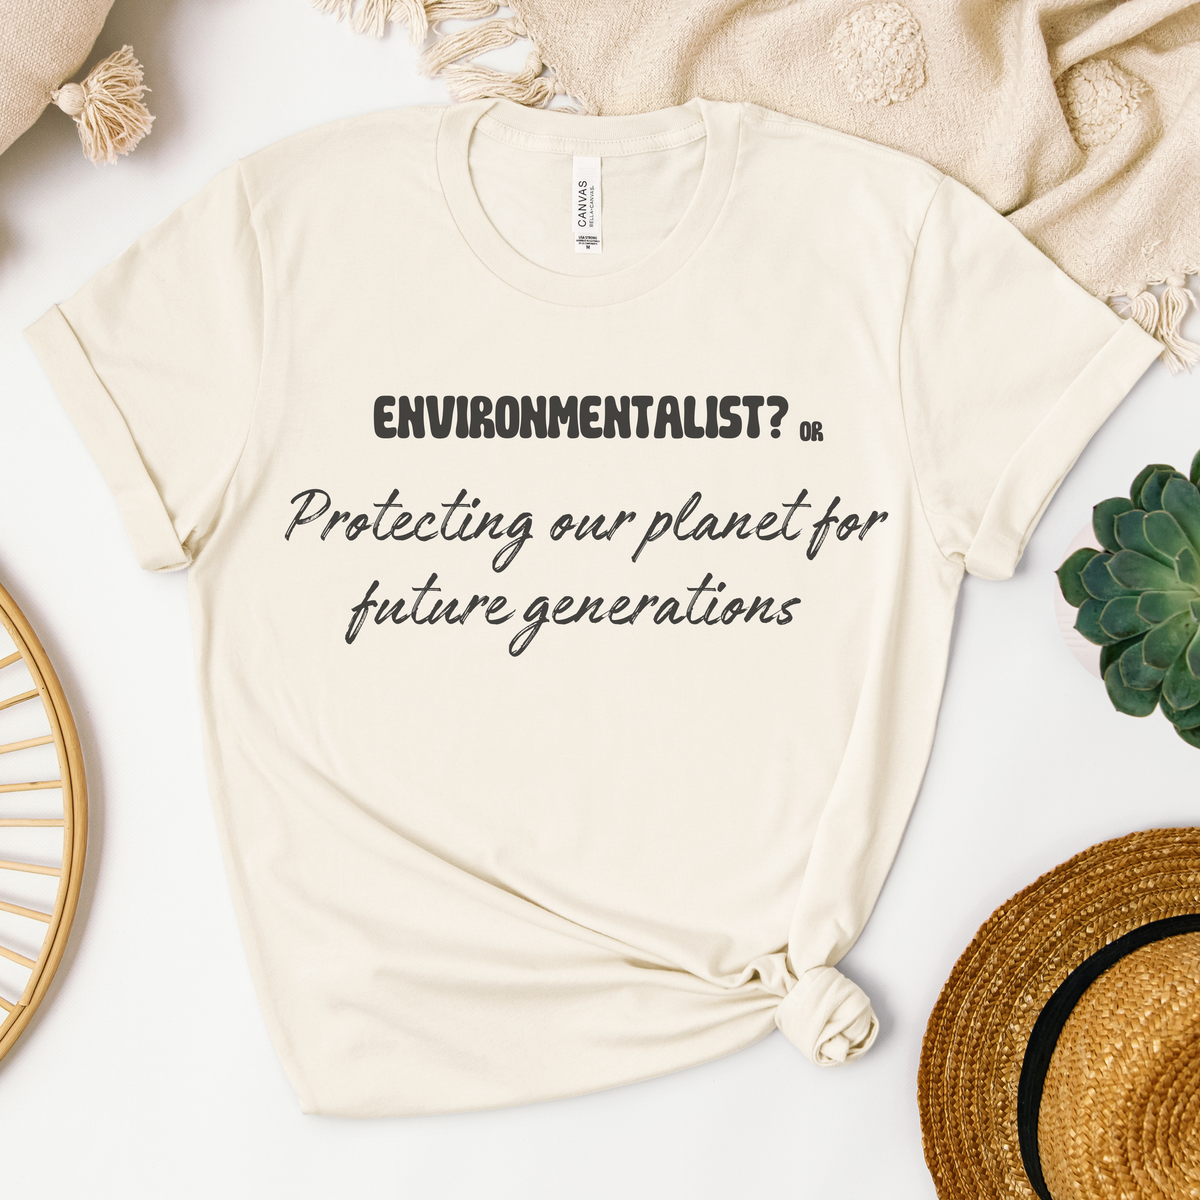 Environmentalist? or Protecting our planet for future generations T-shirt.